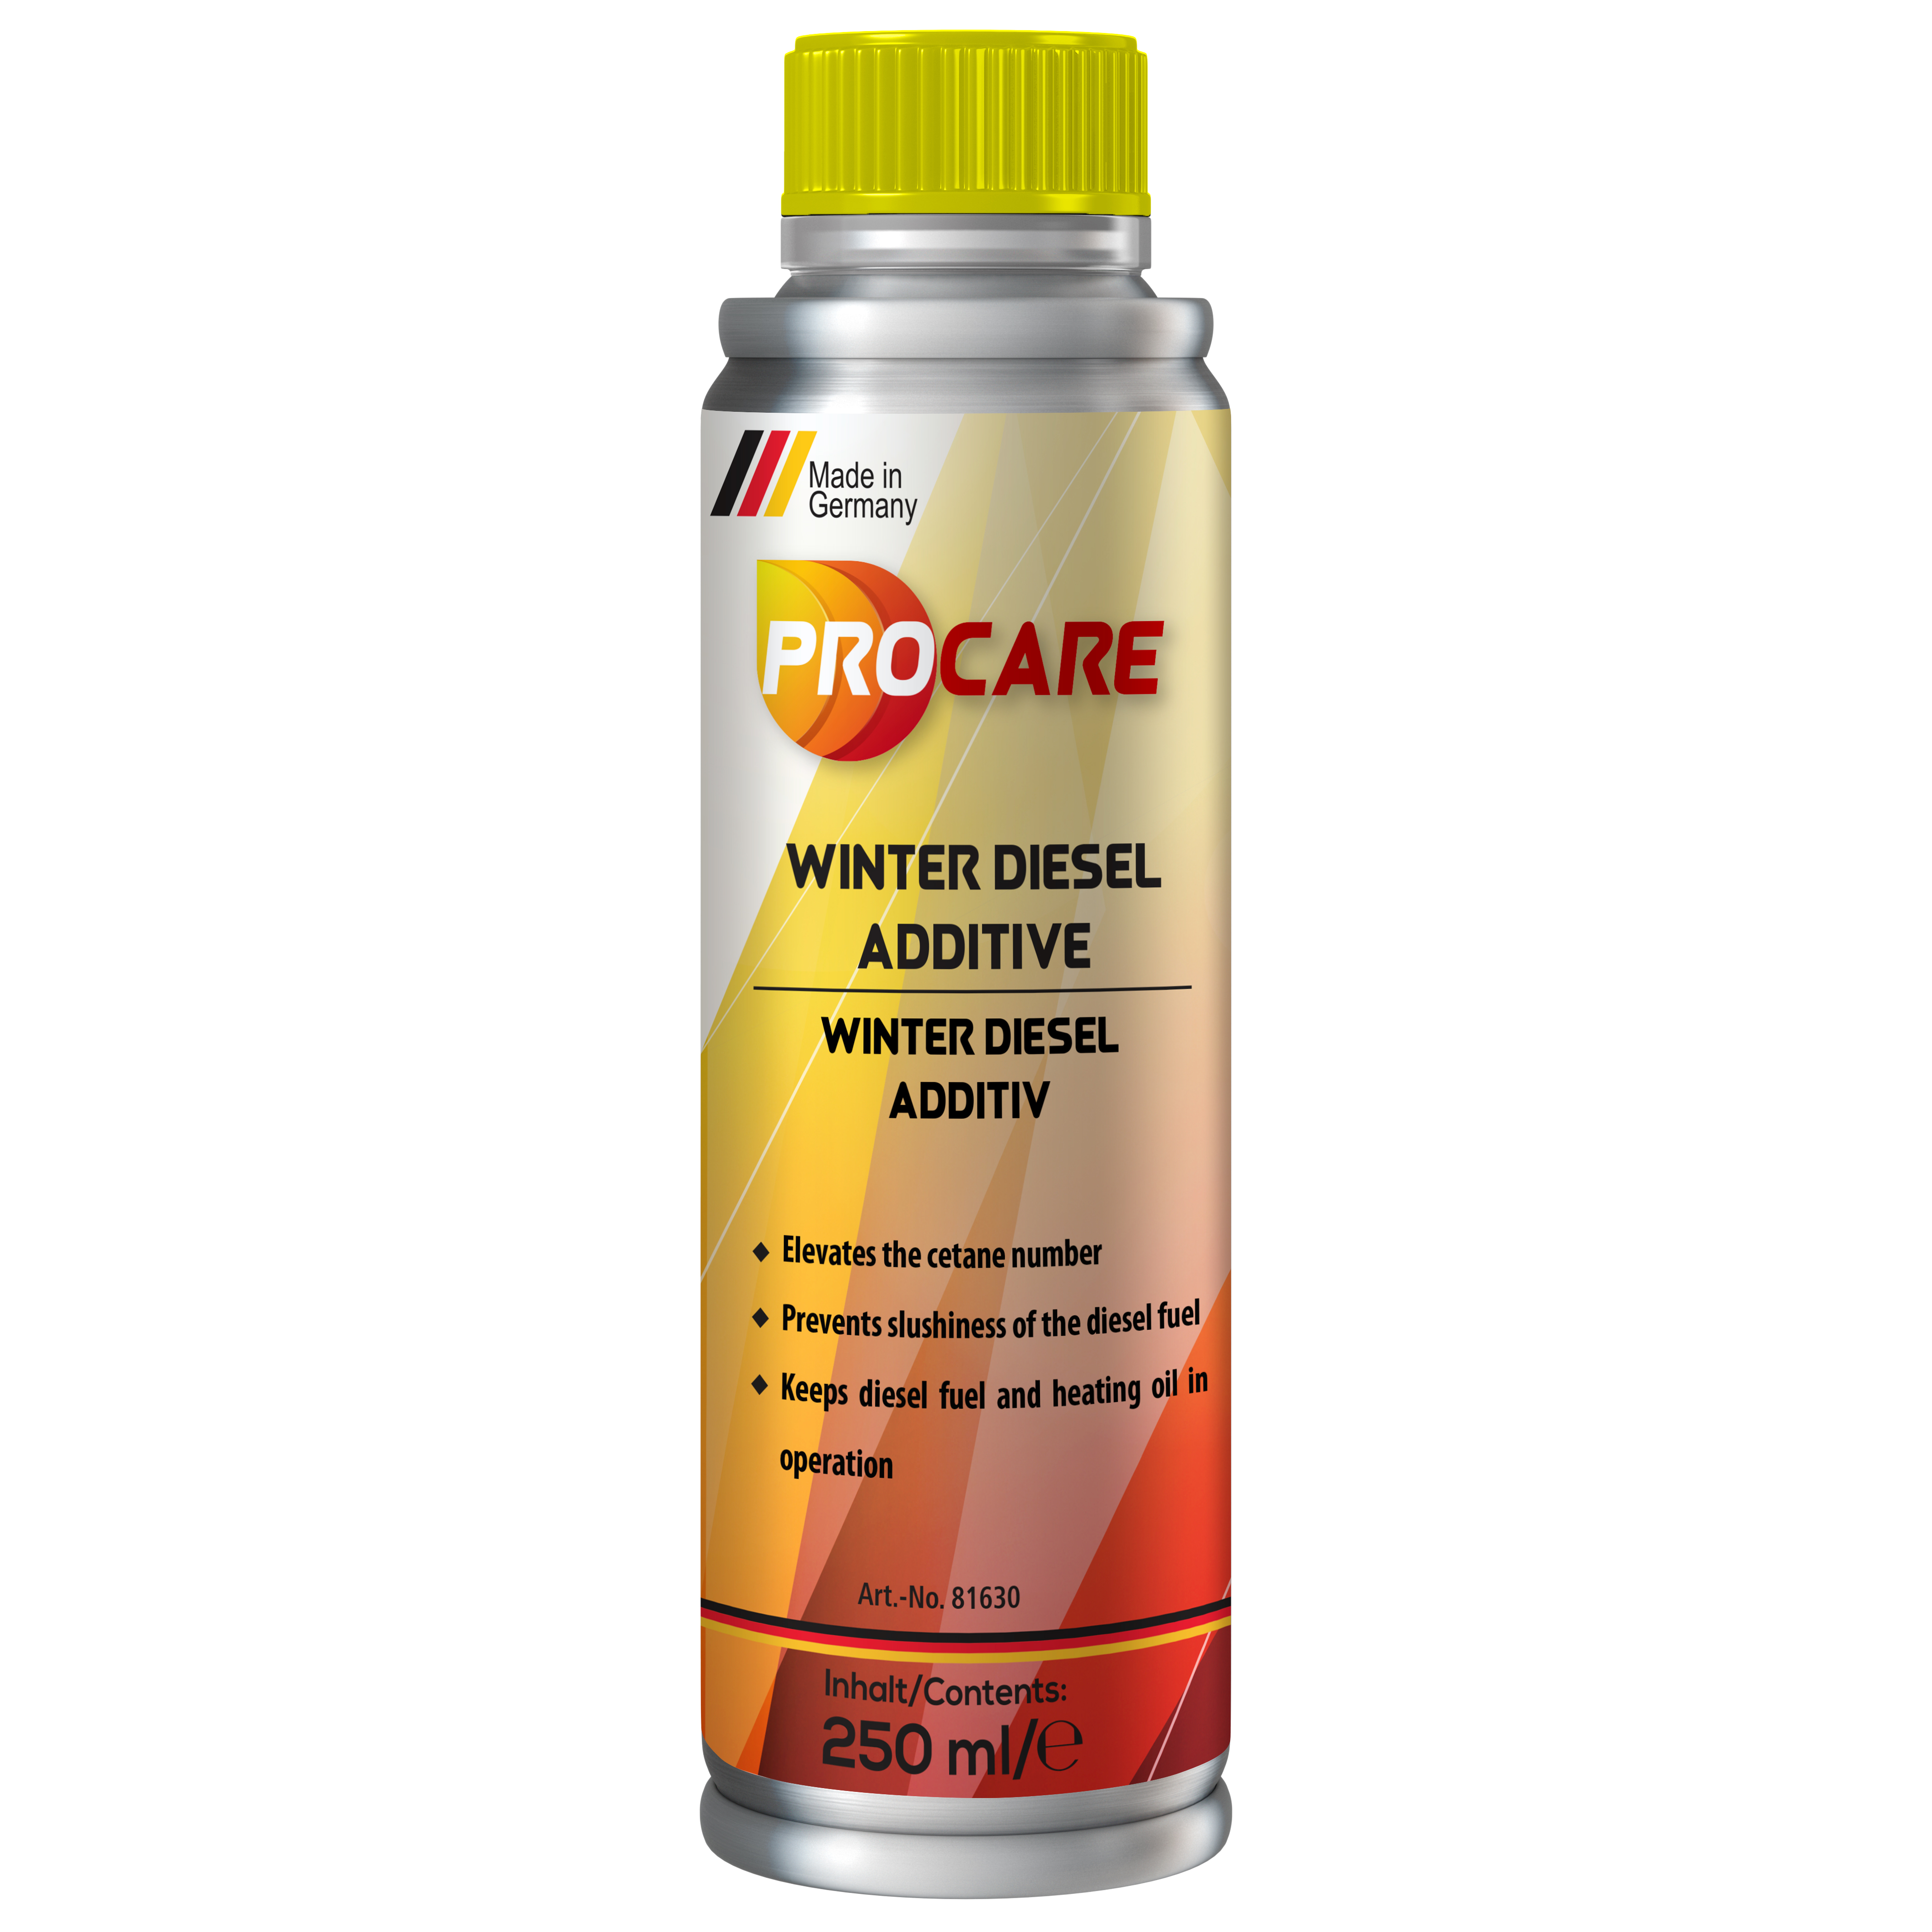 https://www.procare-lubricants.de/Products-spec-sheets/additives/Fuel%20additives/WINTER-DIESEL-ADDITIVE-Image.jpg